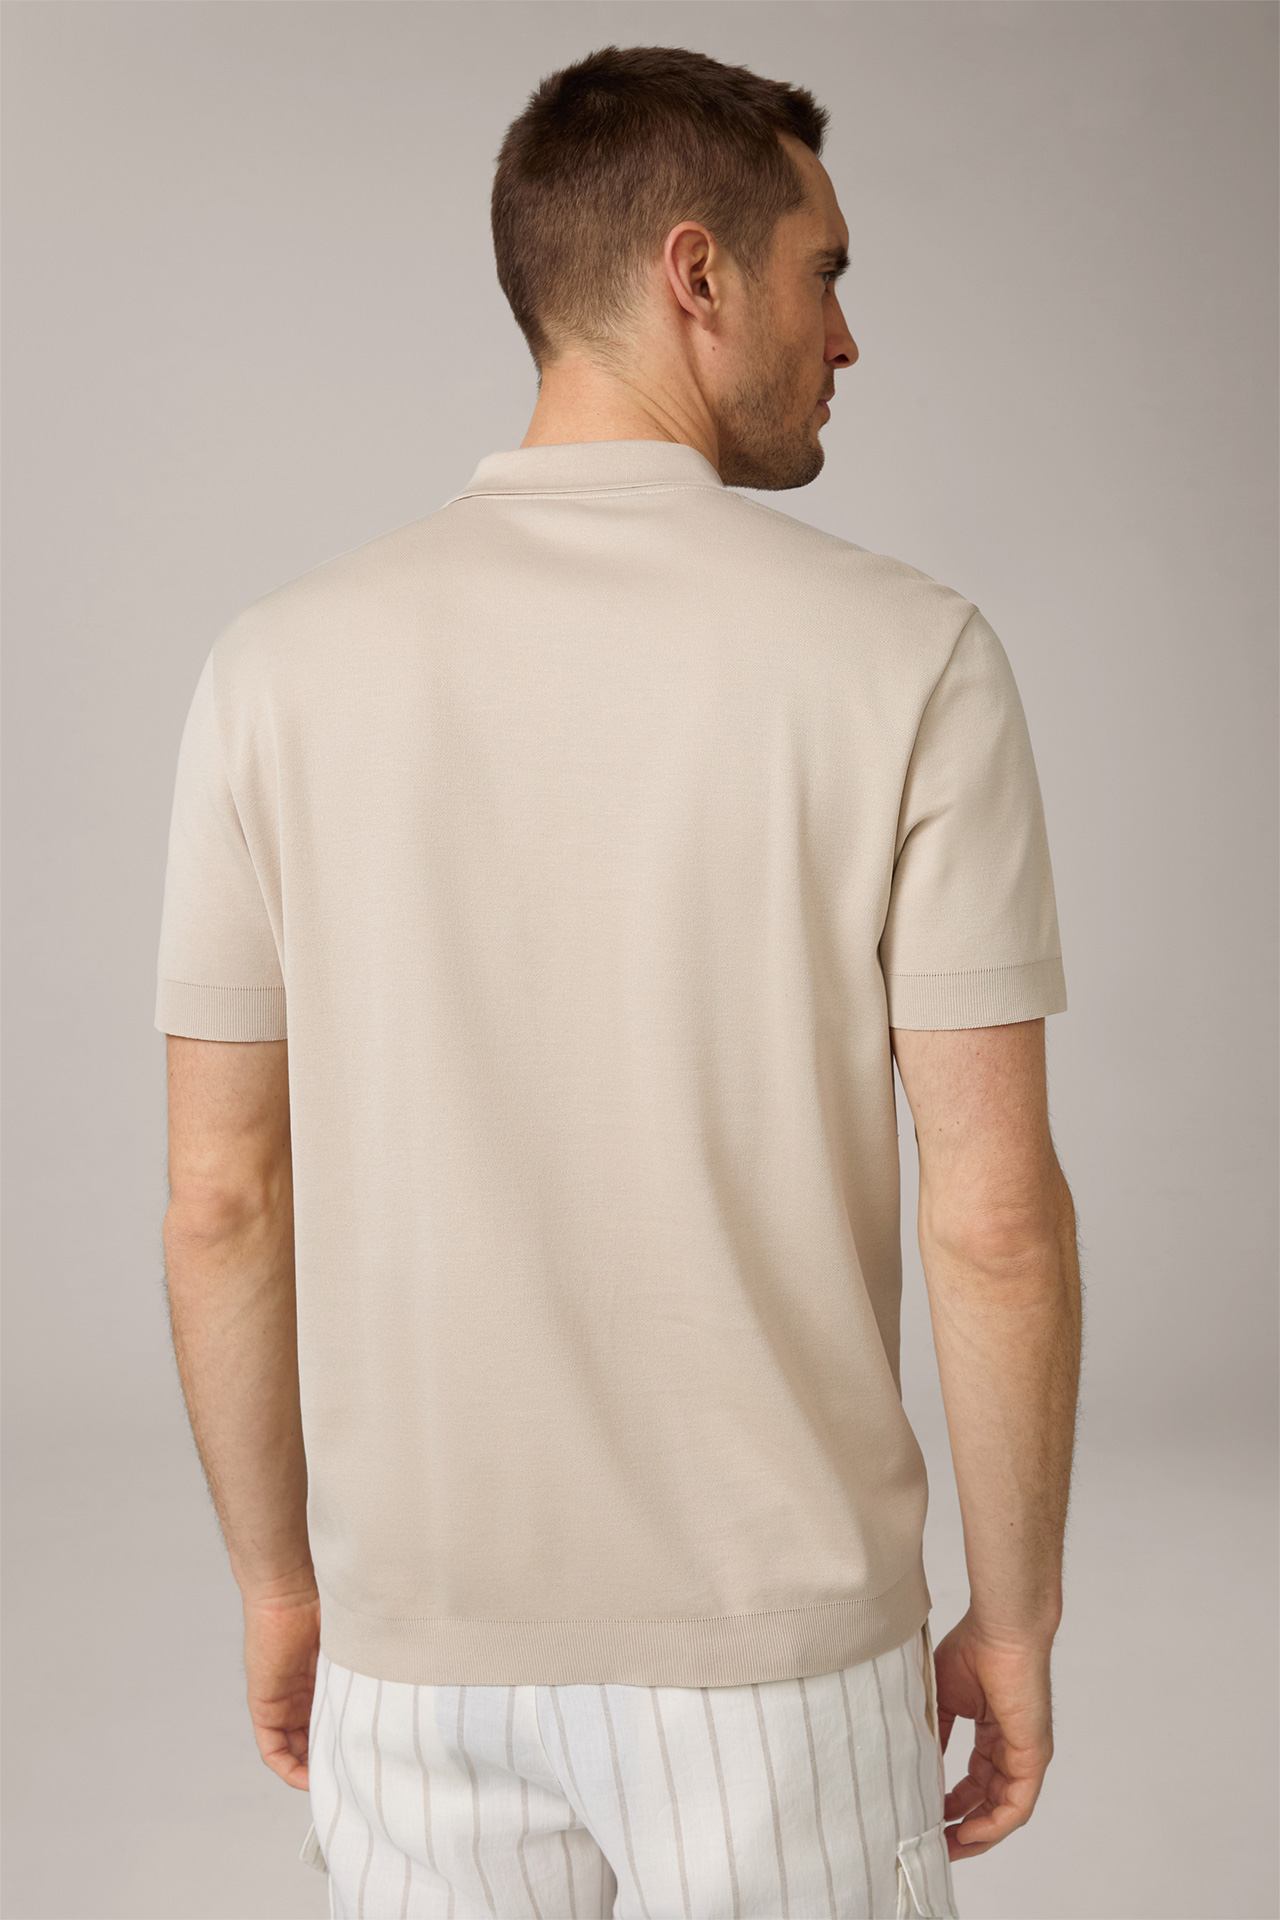 Floro Cotton Polo Shirt with Zipper in Beige